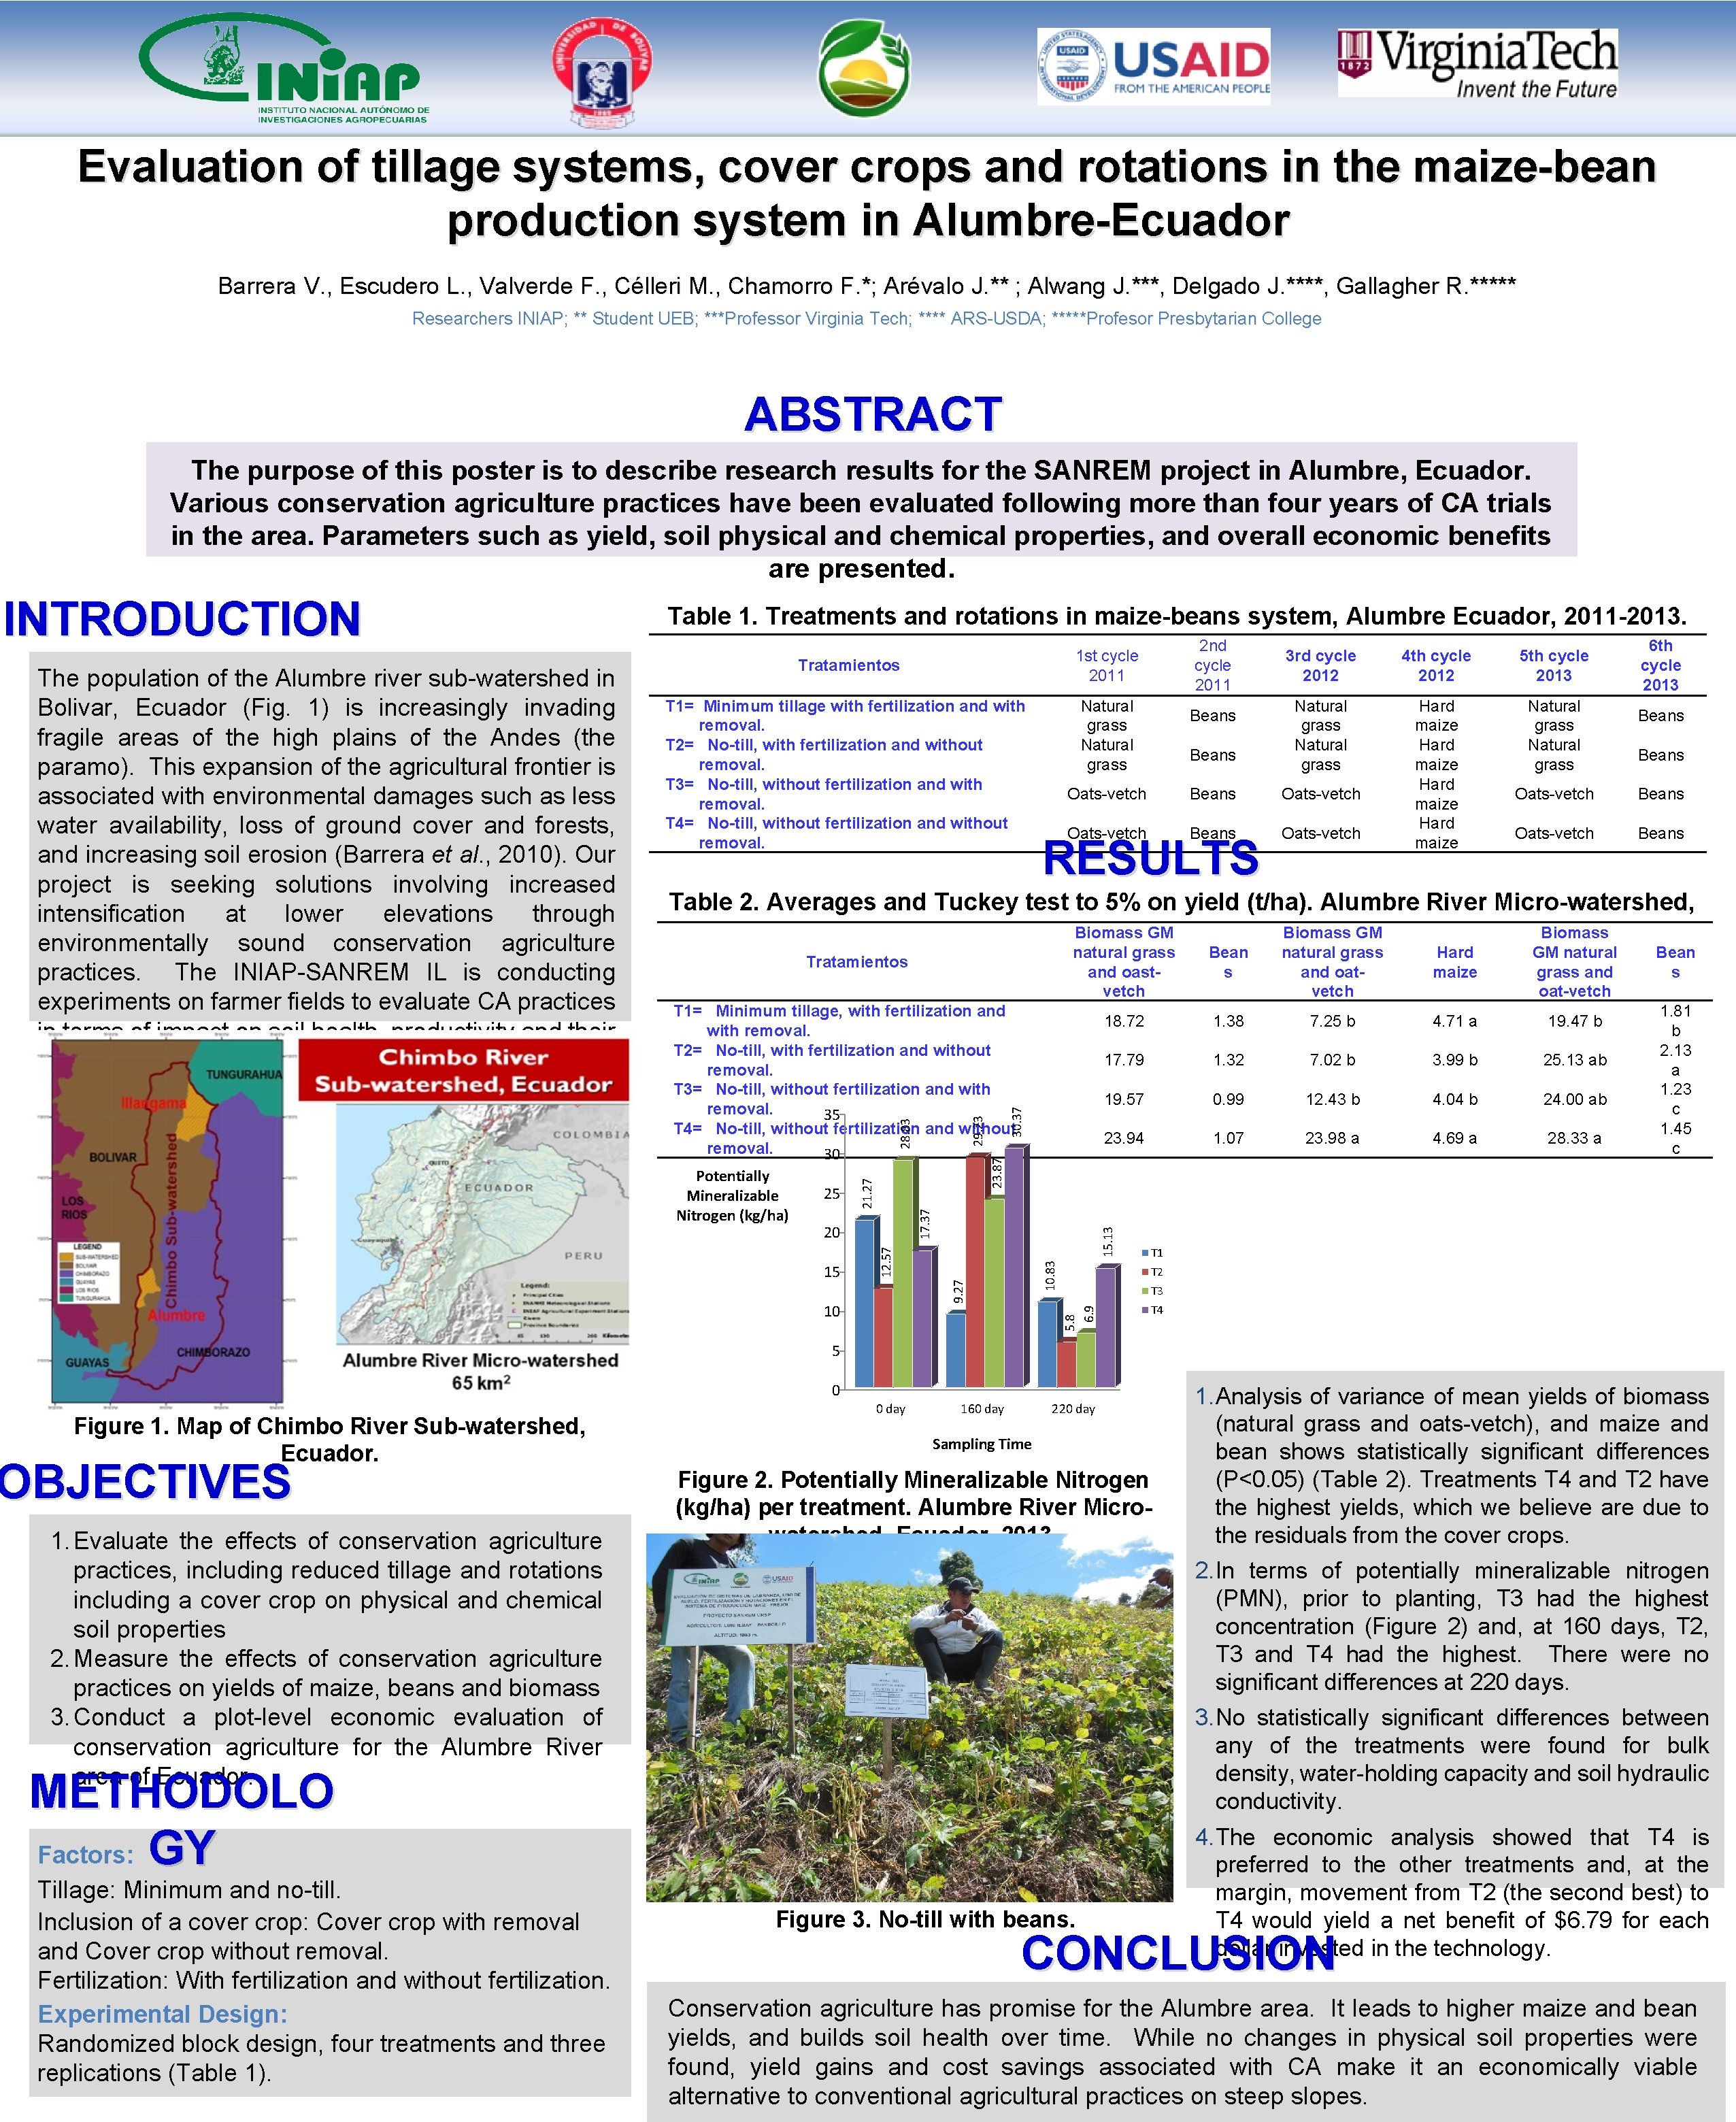 Evaluation of tillage systems, cover crops and rotations in the maize-bean production system in